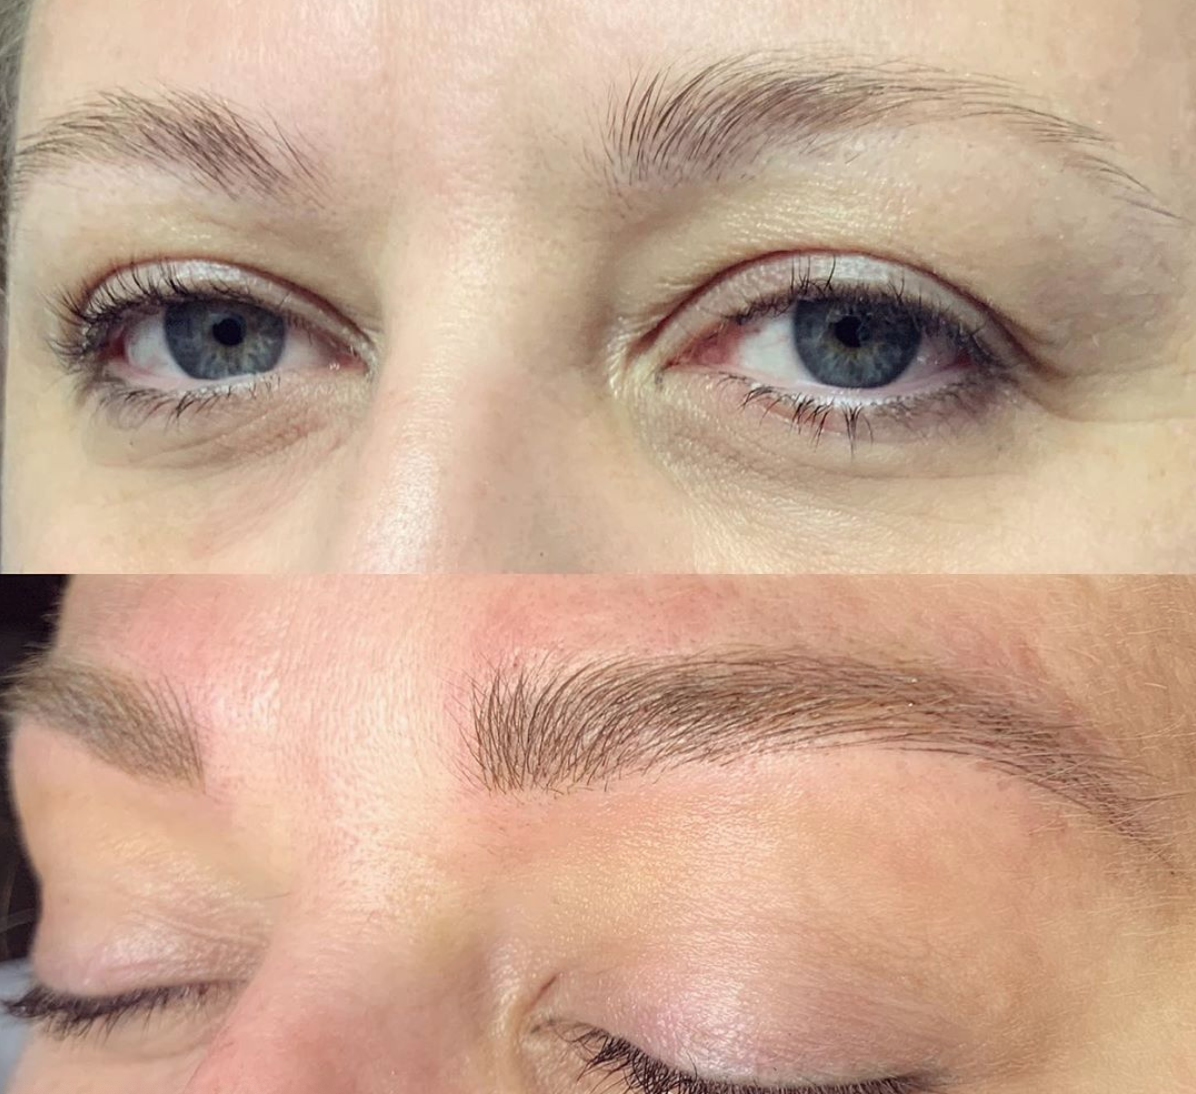 HAIRY Microblading vs. Microfeathering: What's the Difference?